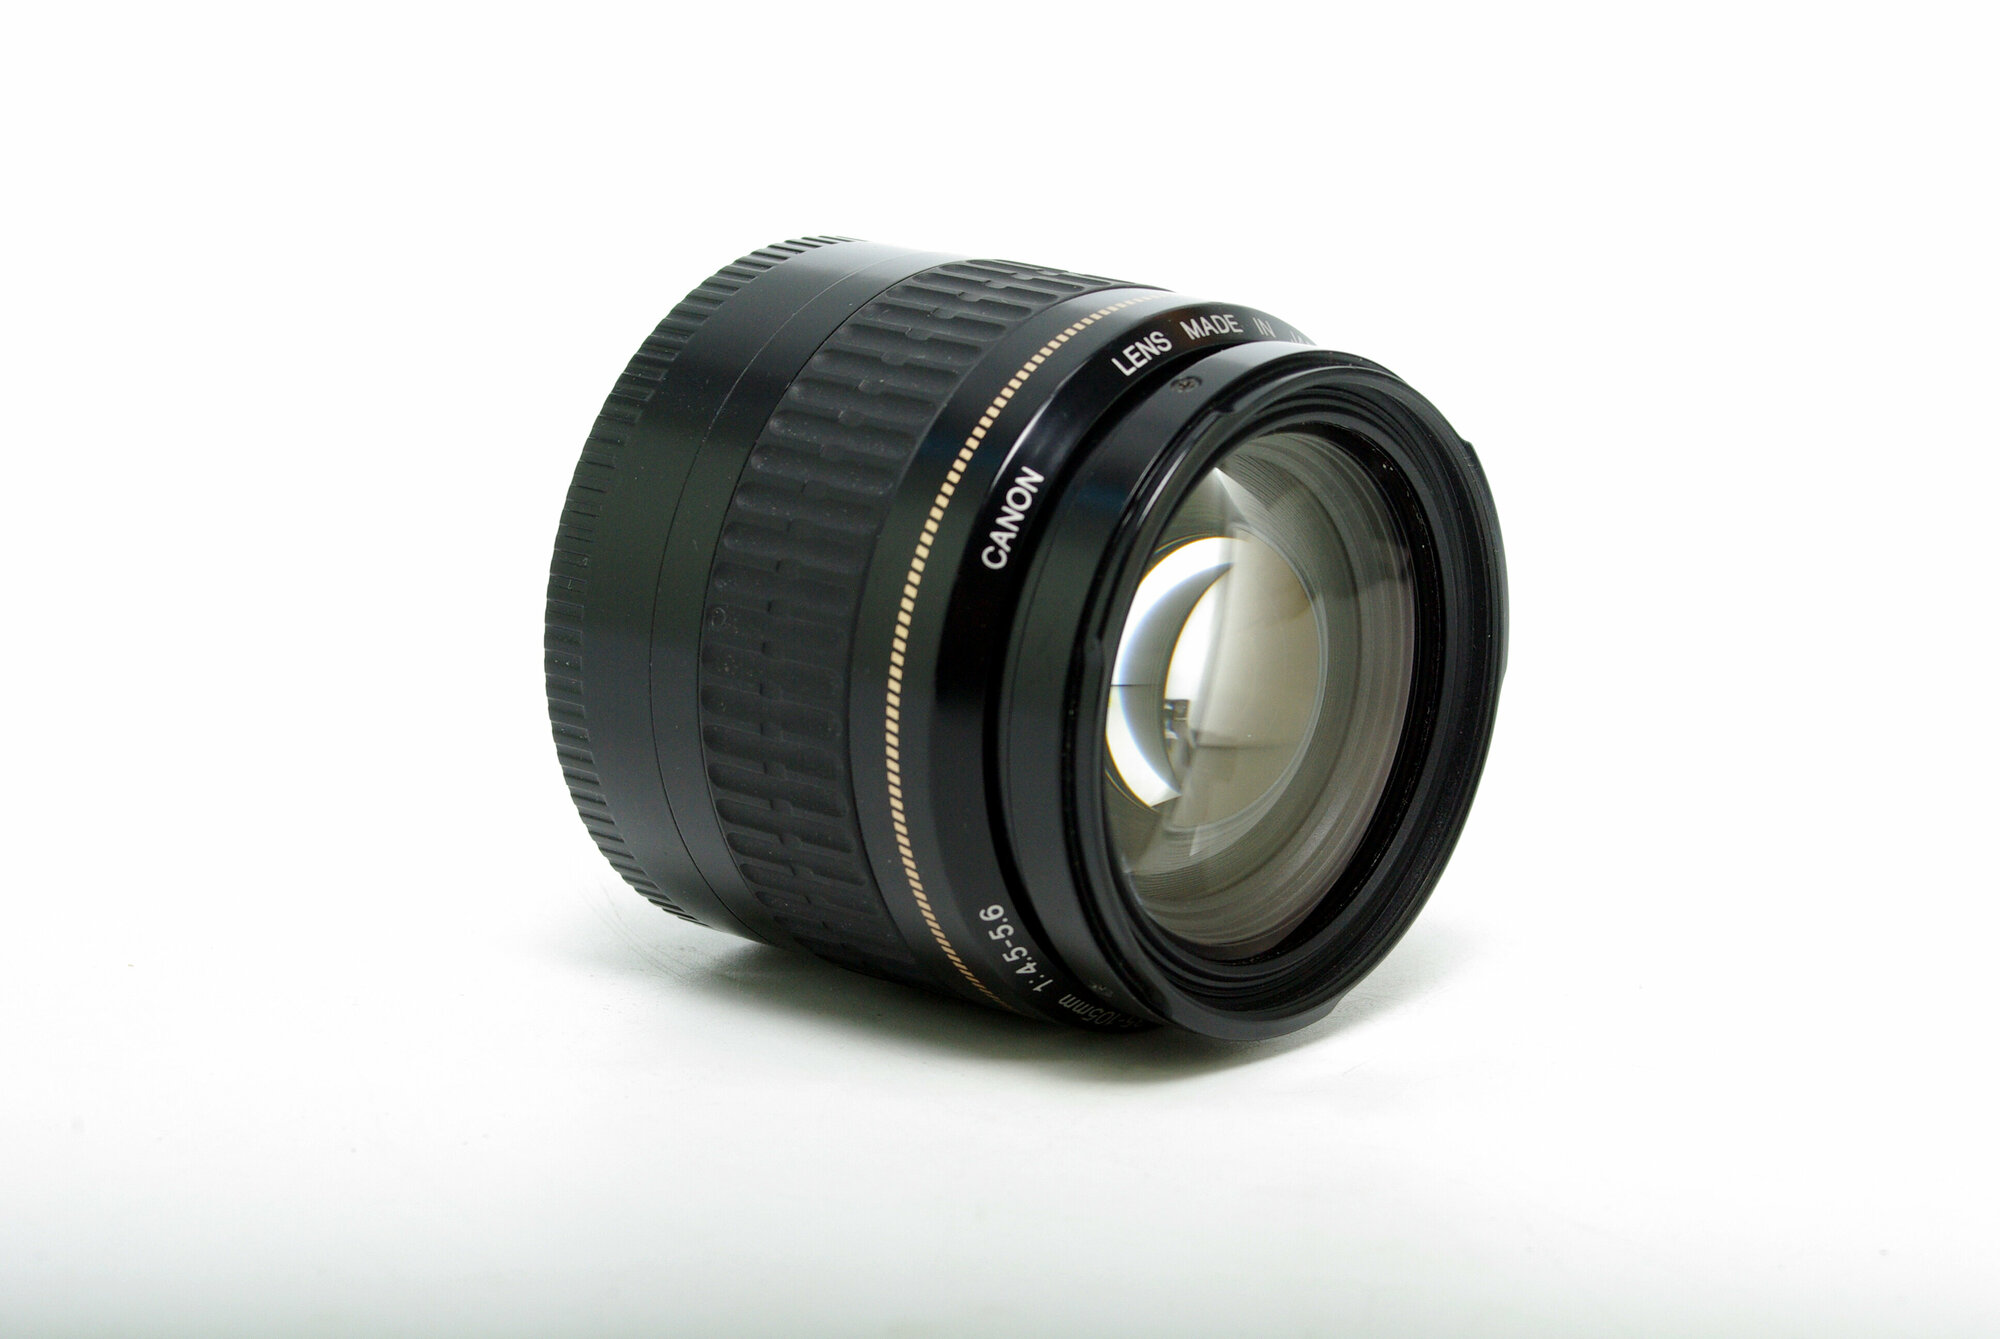 Canon Zoom EF 35-105mm f4.5-5.6